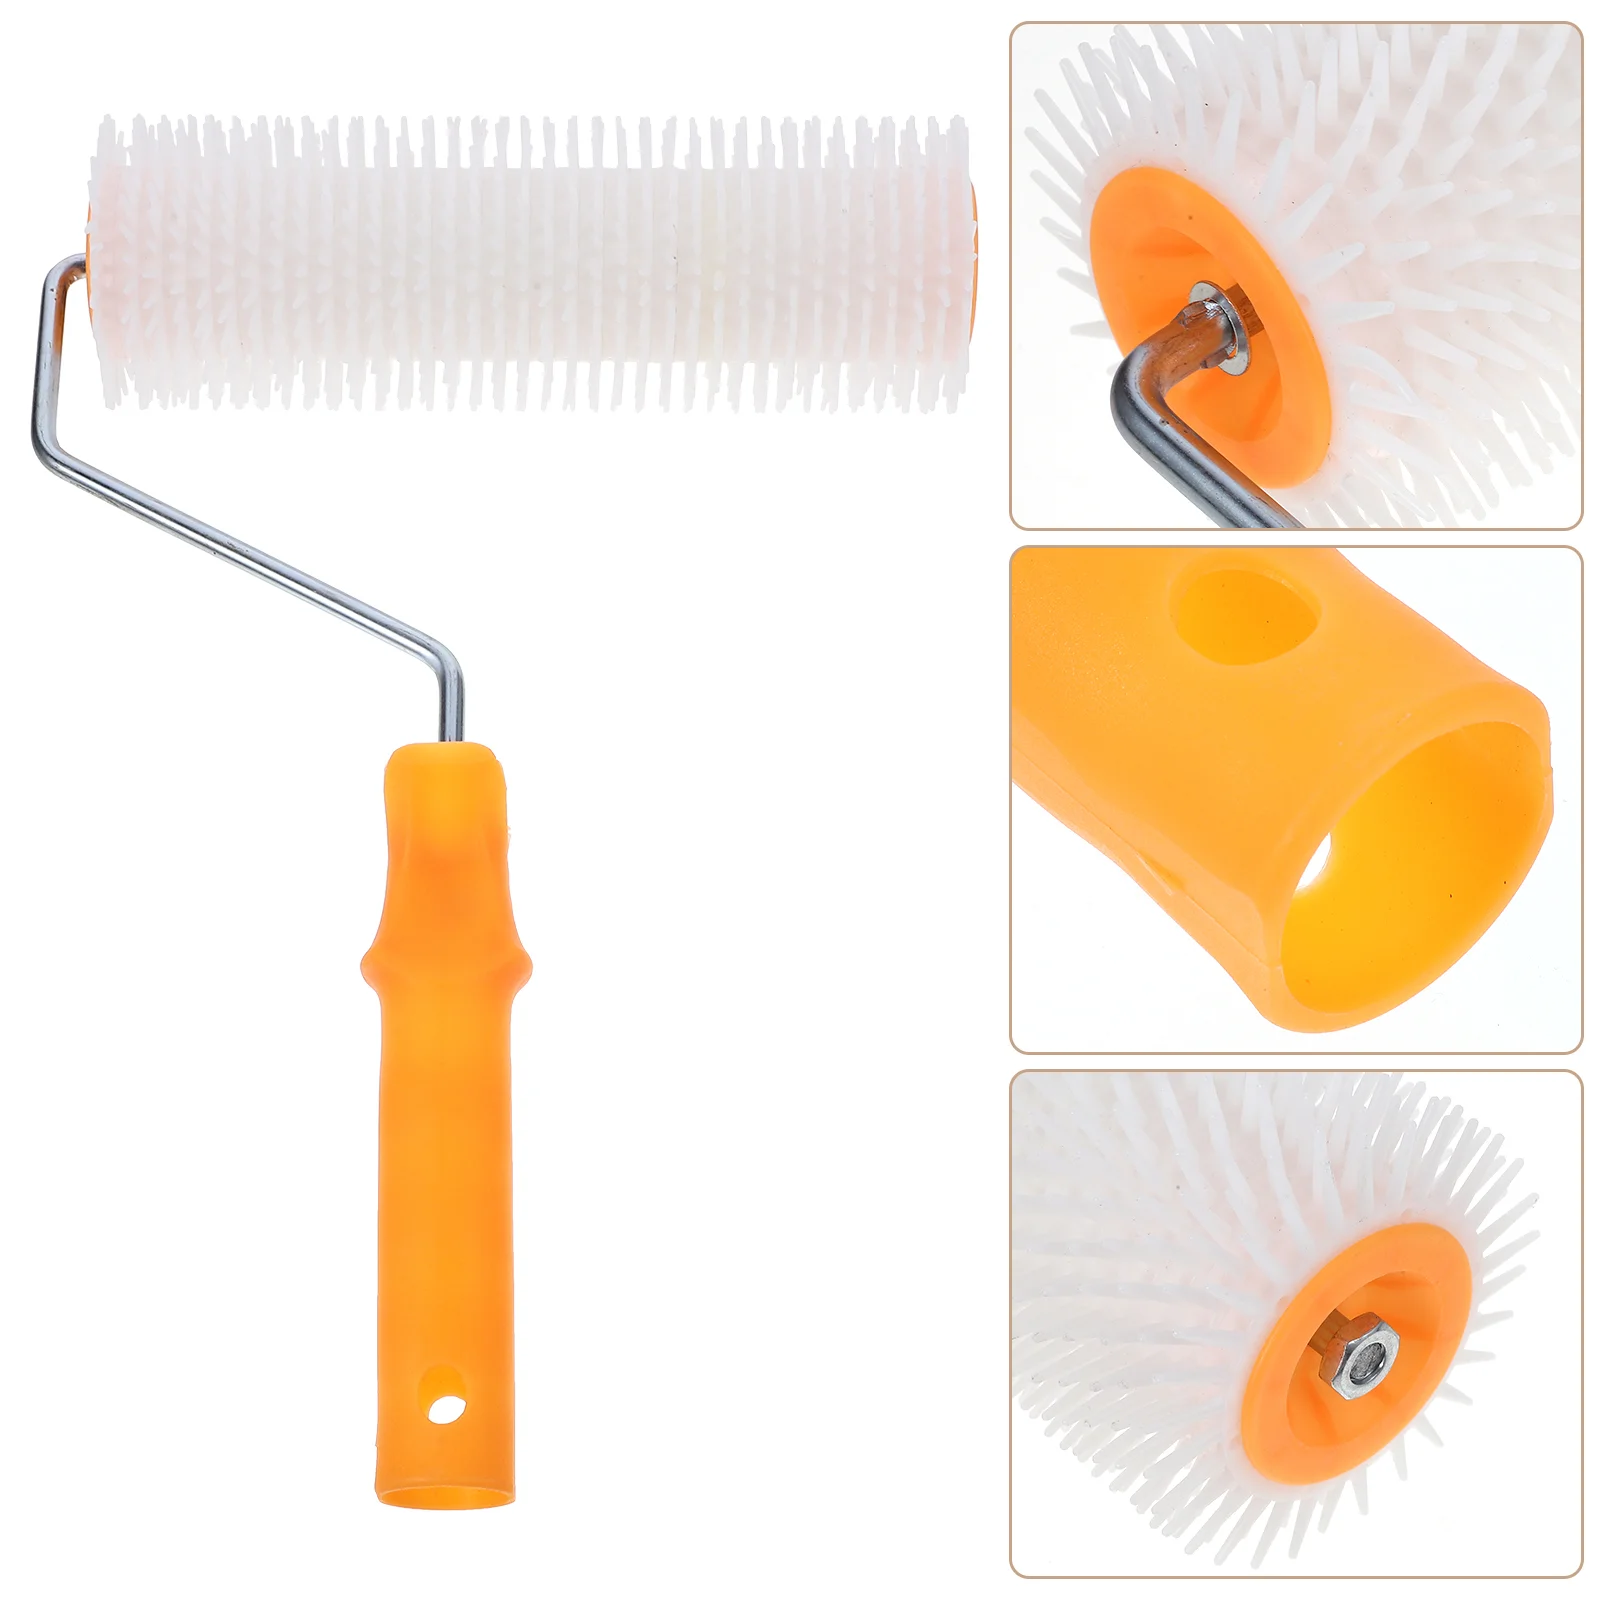 

Roller Self Leveling Spiked Cement Floor Nail Brush Screeding Compound Trim Foam Manual Silicone